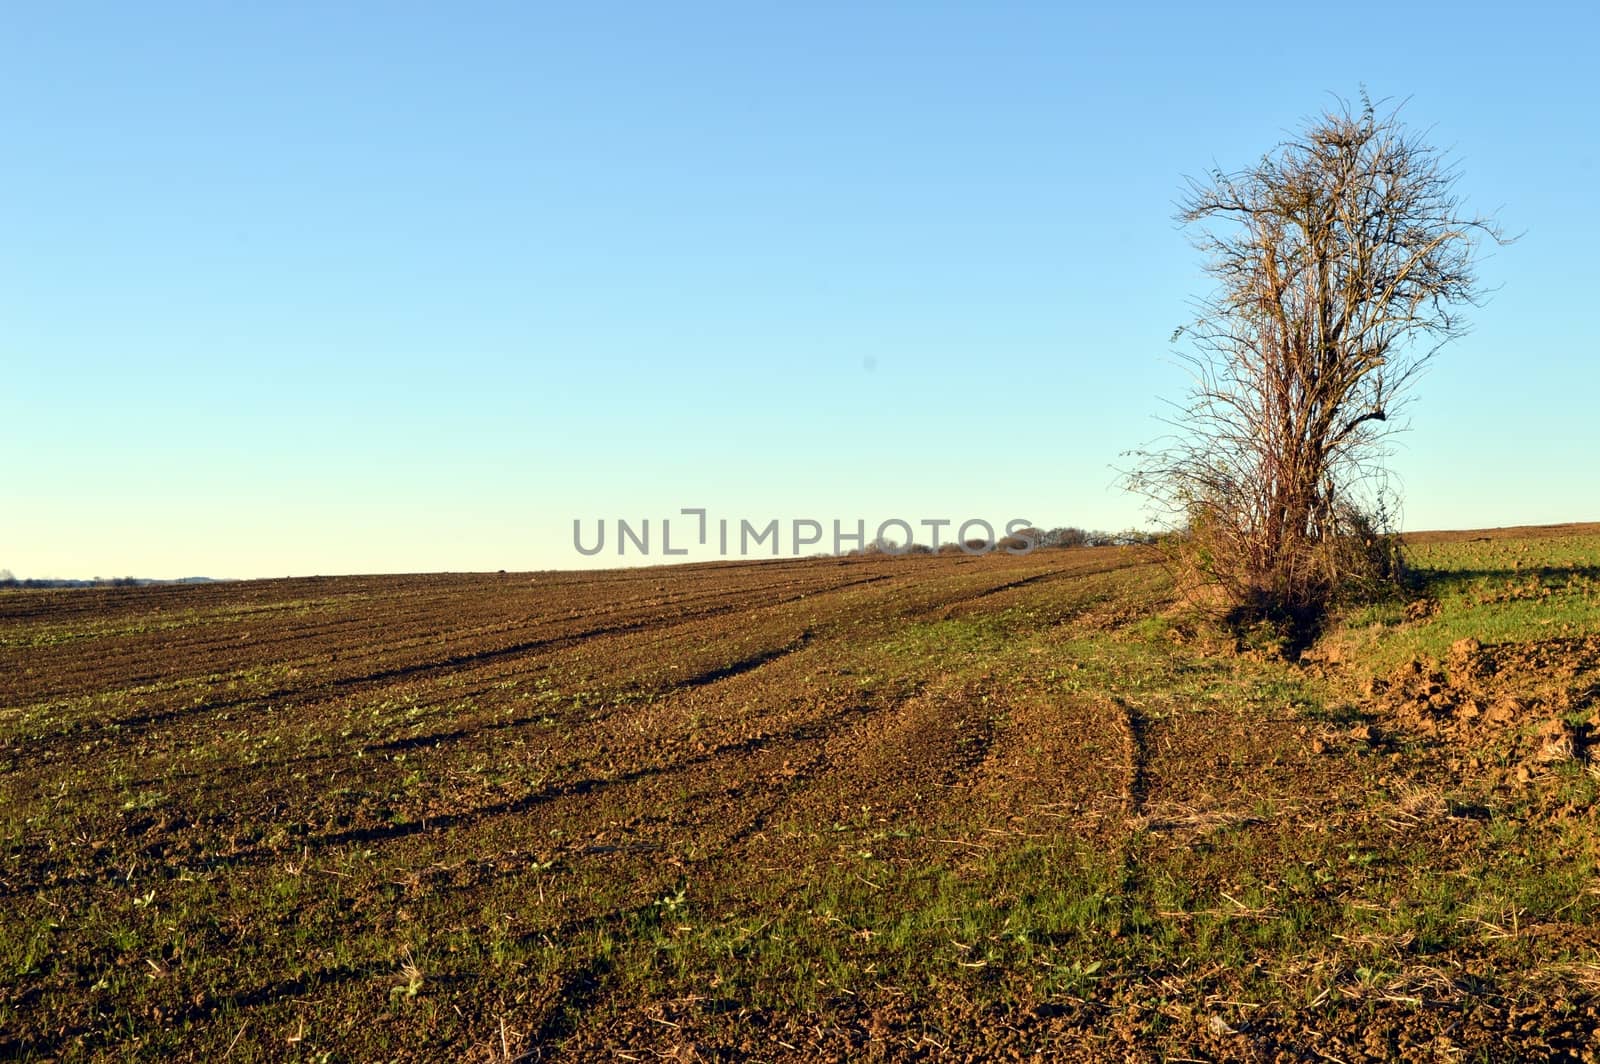 Plowing field with a tree isolated under a setting sun